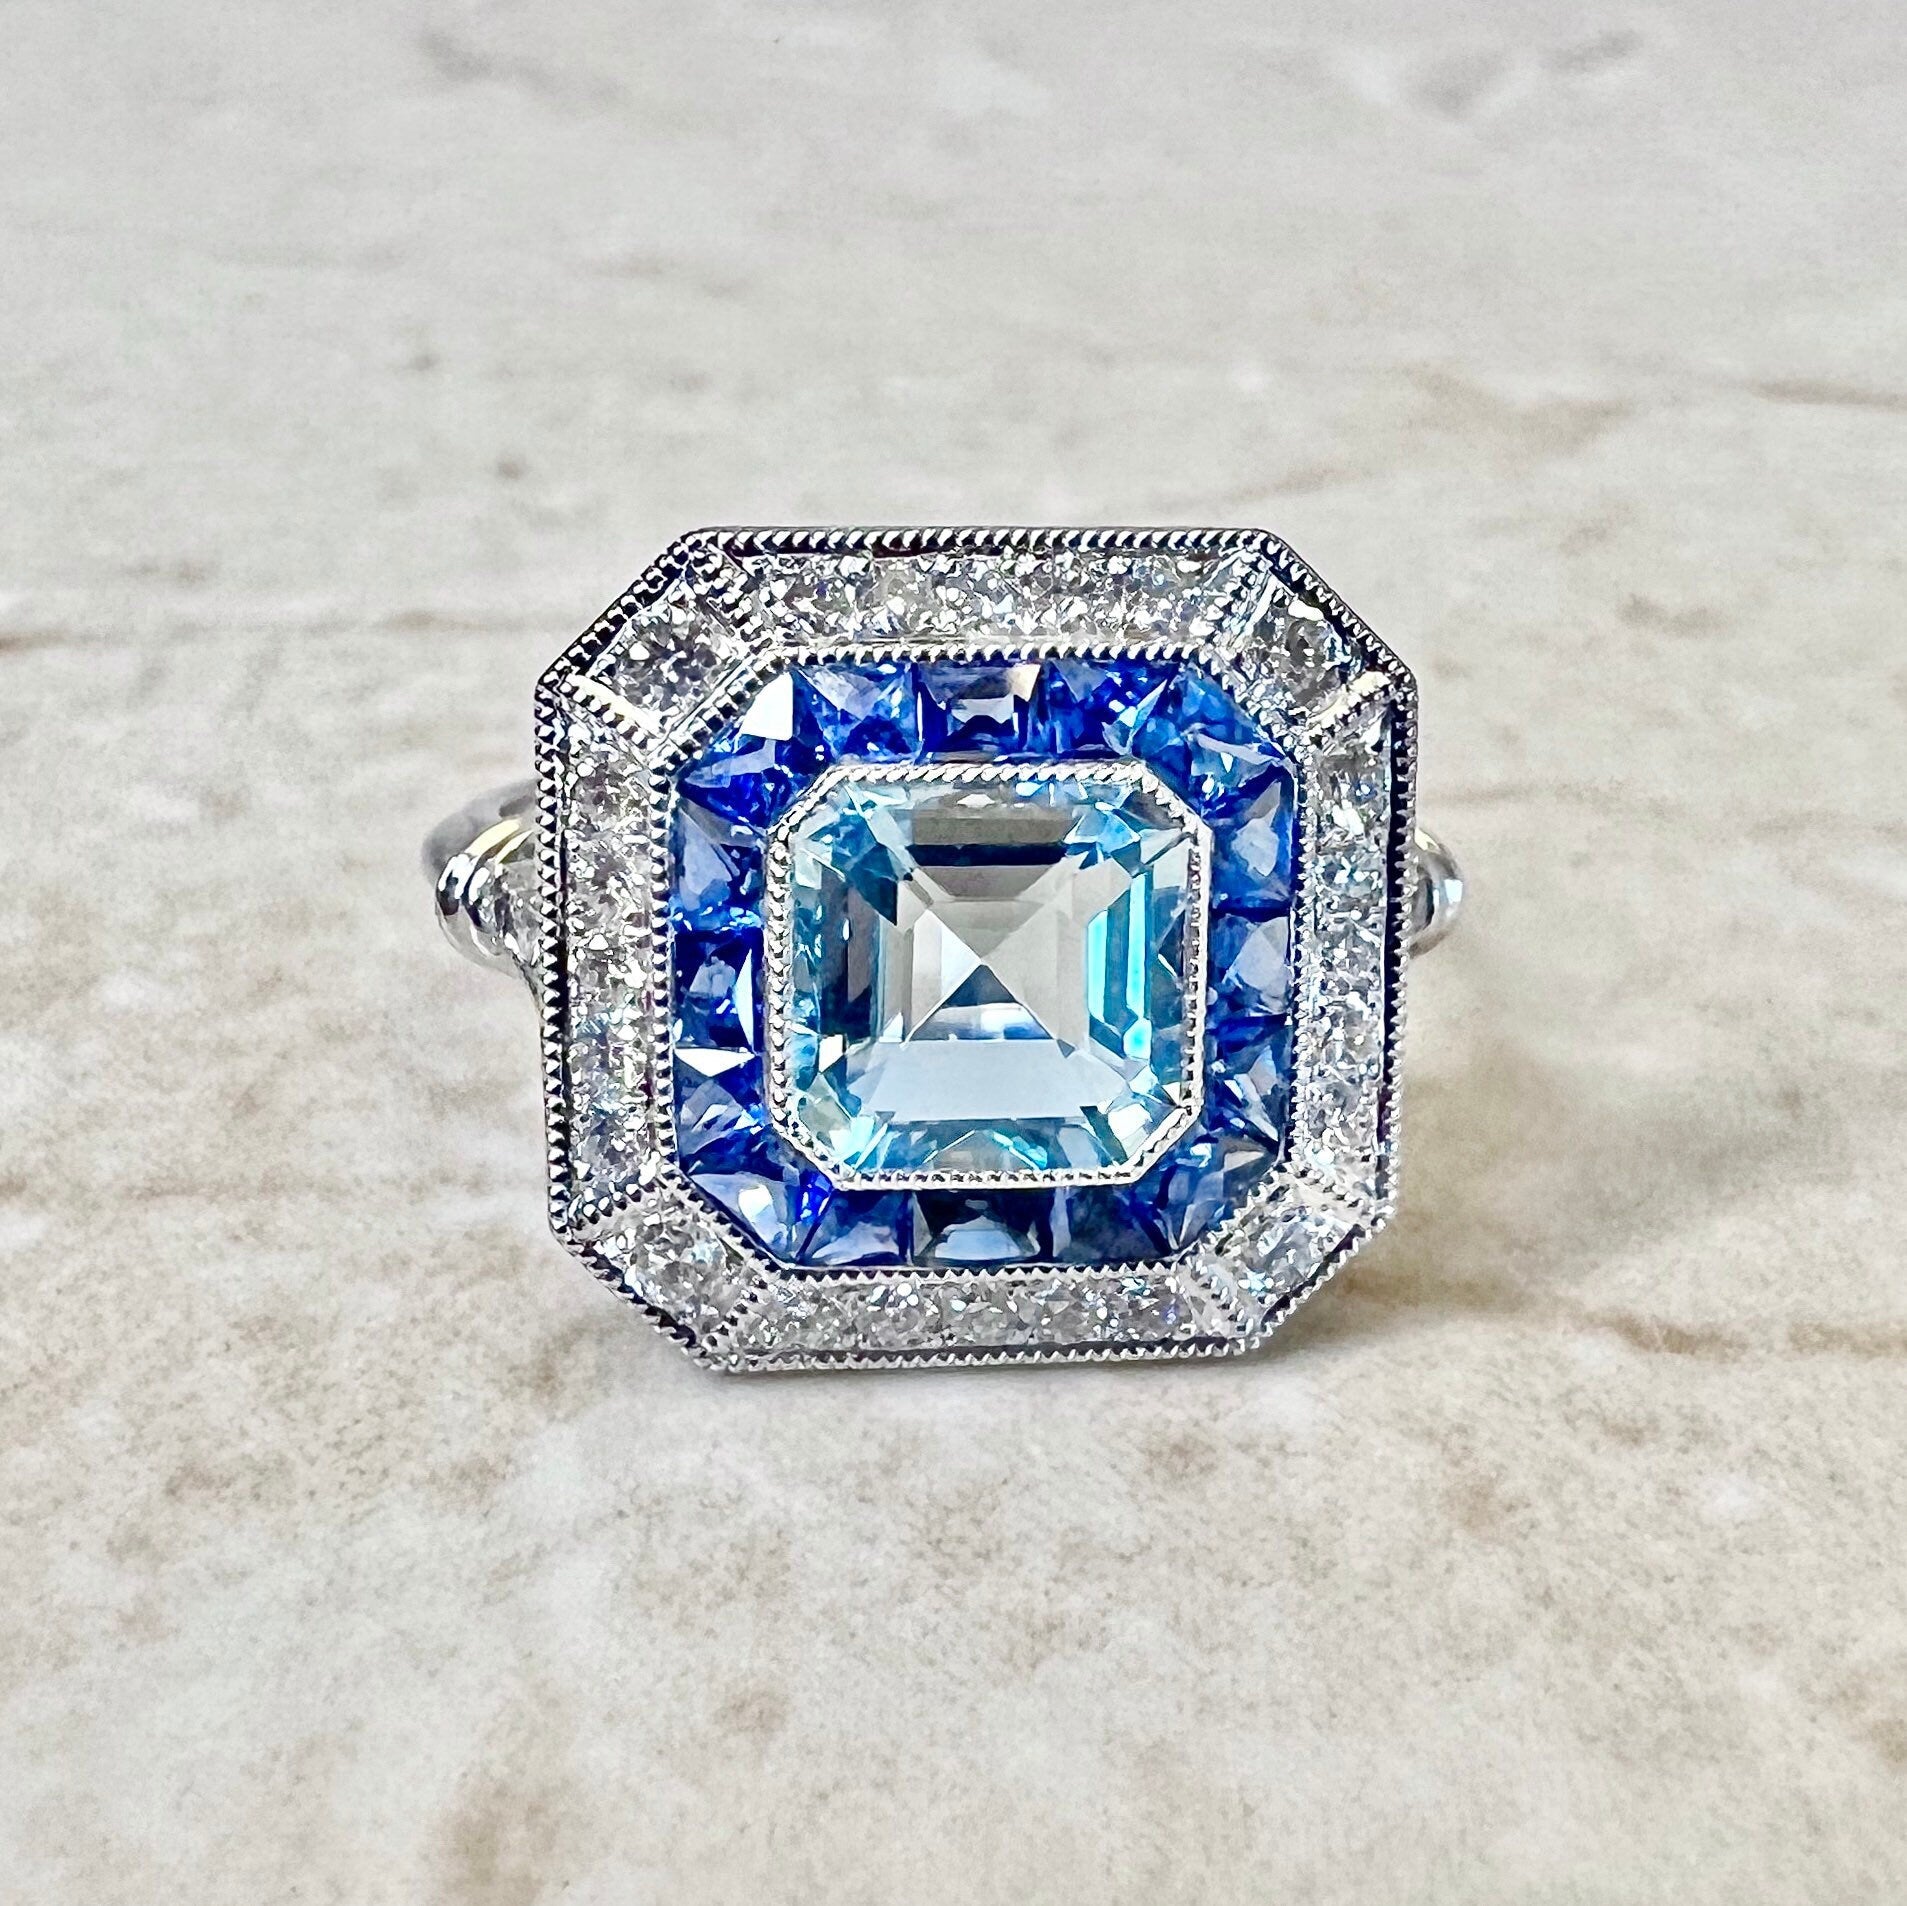 Very Fine Handcrafted Platinum Art Deco Style Aquamarine, Sapphire & Diamond Halo Ring - Cocktail Ring - Engagement Ring - Promise Ring